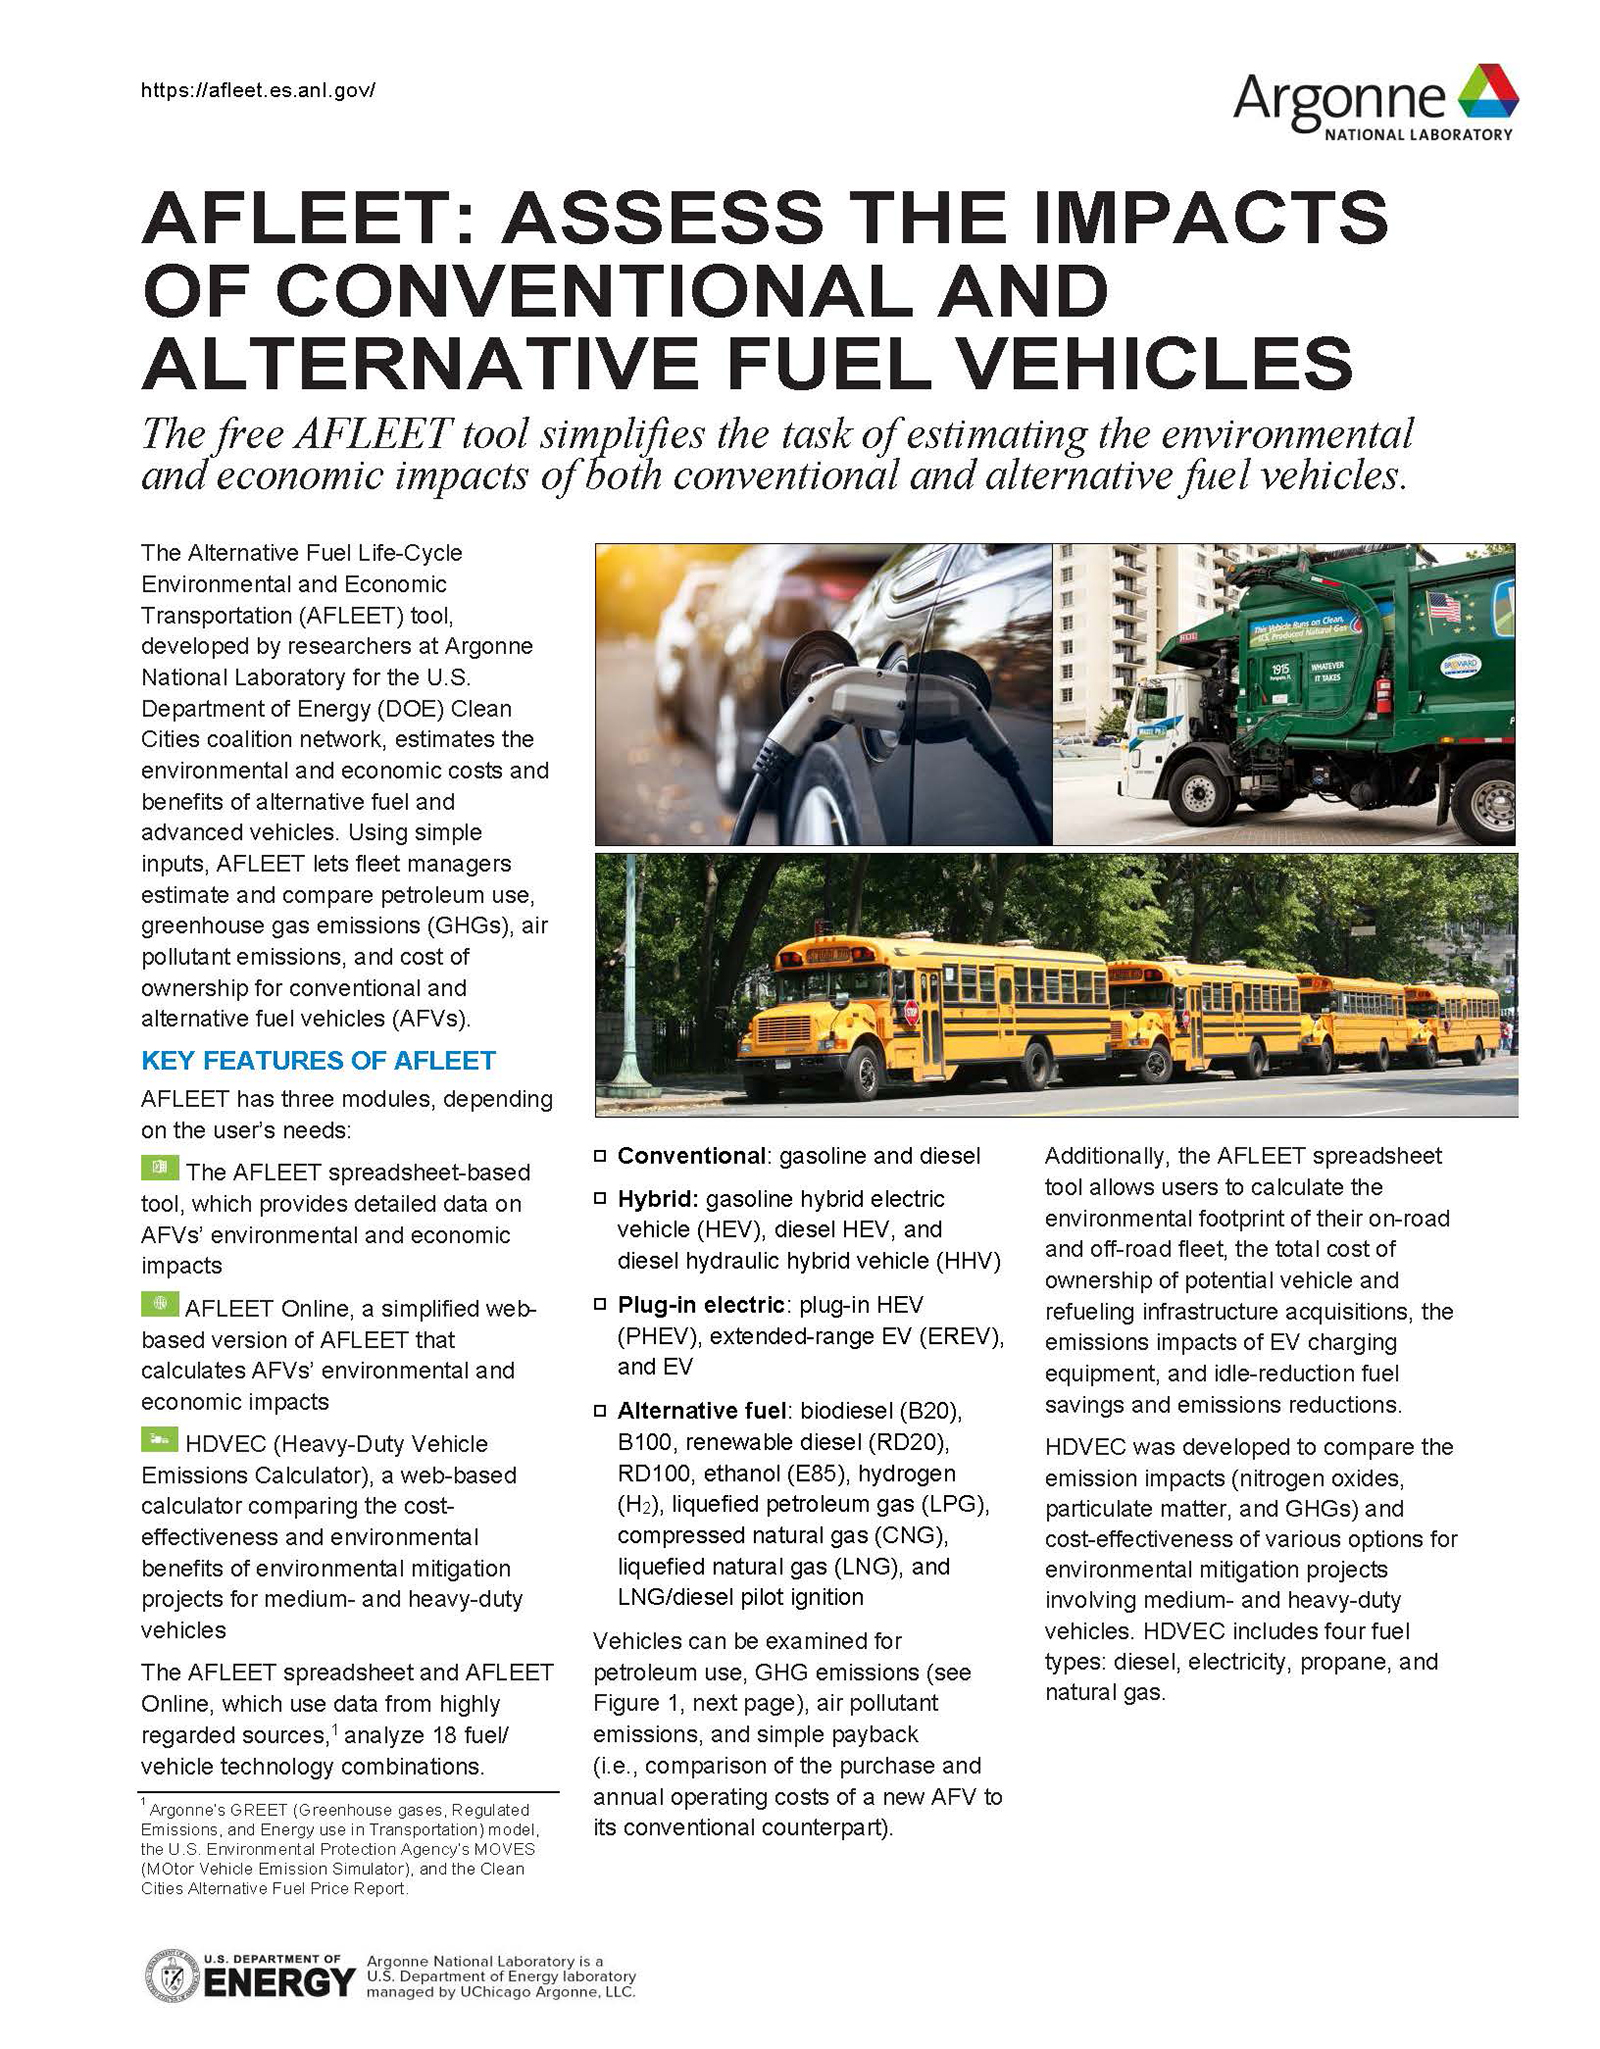 AFLEET: Assess the Impacts of Conventional and Alternative Fuel Vehicles (factsheet)